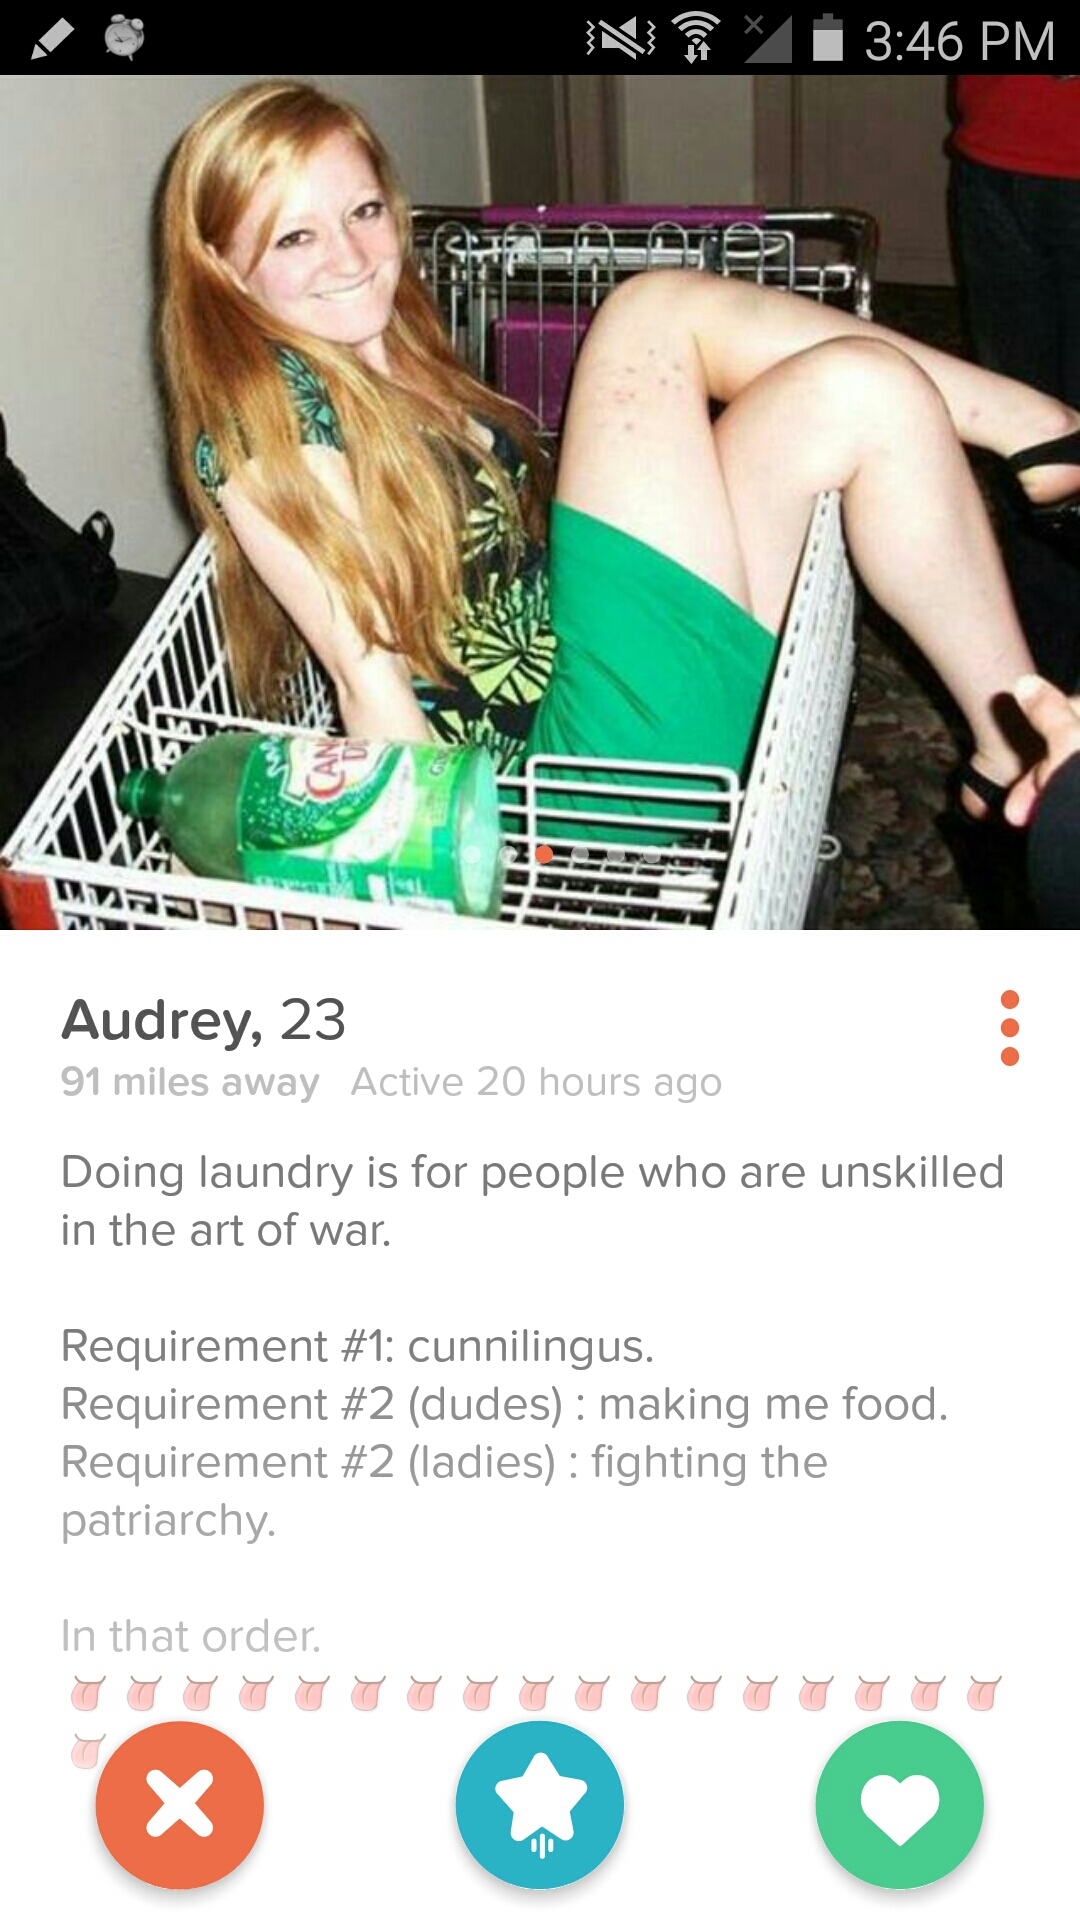 tinder - tinder laundry lists - NS21 Aw mas Audrey, 23 91 miles away Active 20 hours ago Doing laundry is for people who are unskilled in the art of war. Requirement cunnilingus Requirement dudes making me food. Requirement ladies fighting the patriarchy.